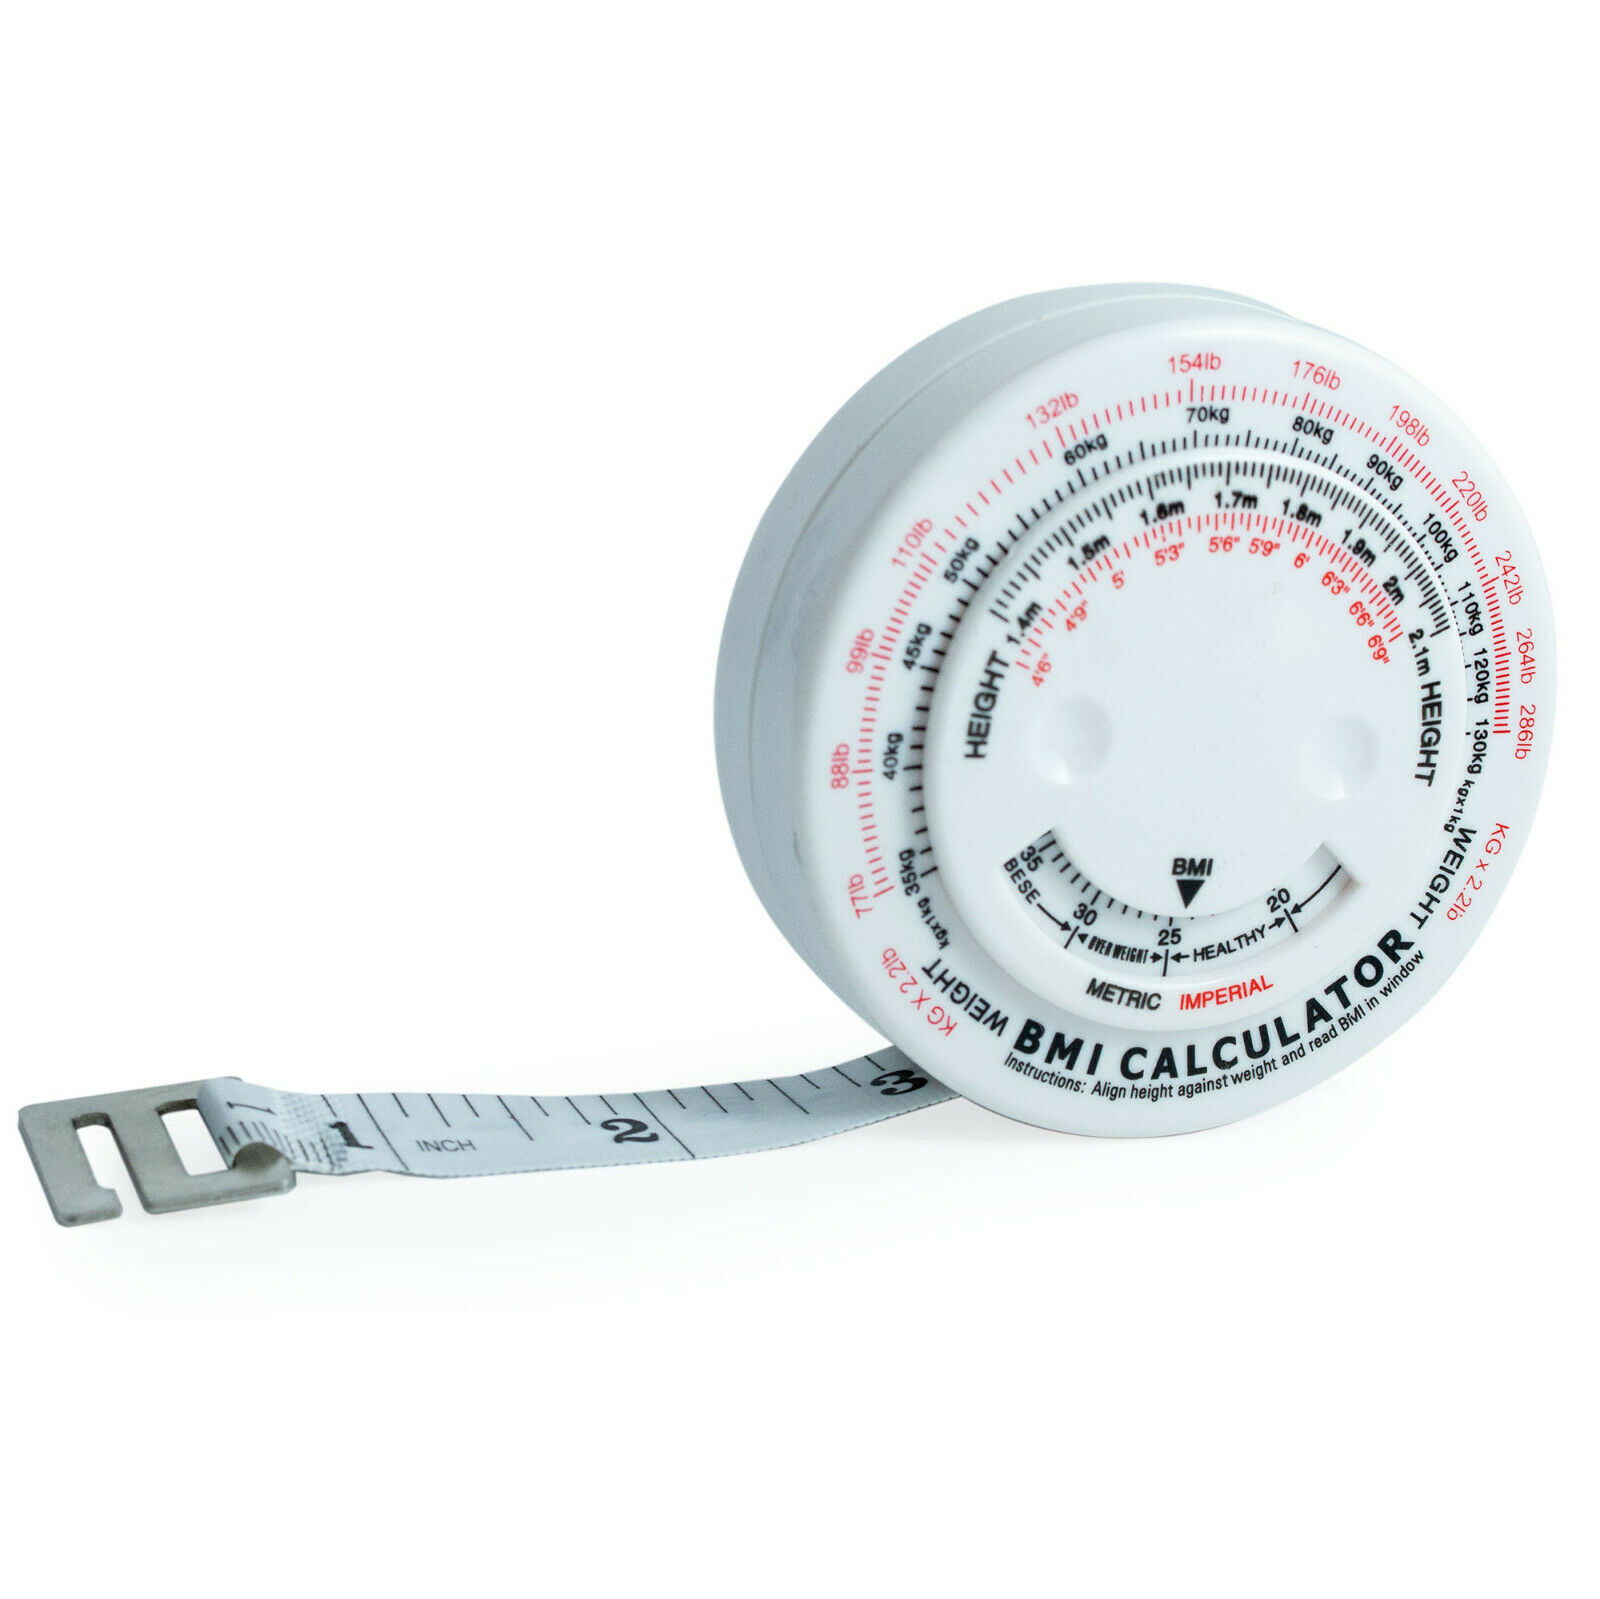 Body Mass Measuring Tape W/ Bmi Calculator - Fitness Weight Loss Muscle Fat Test